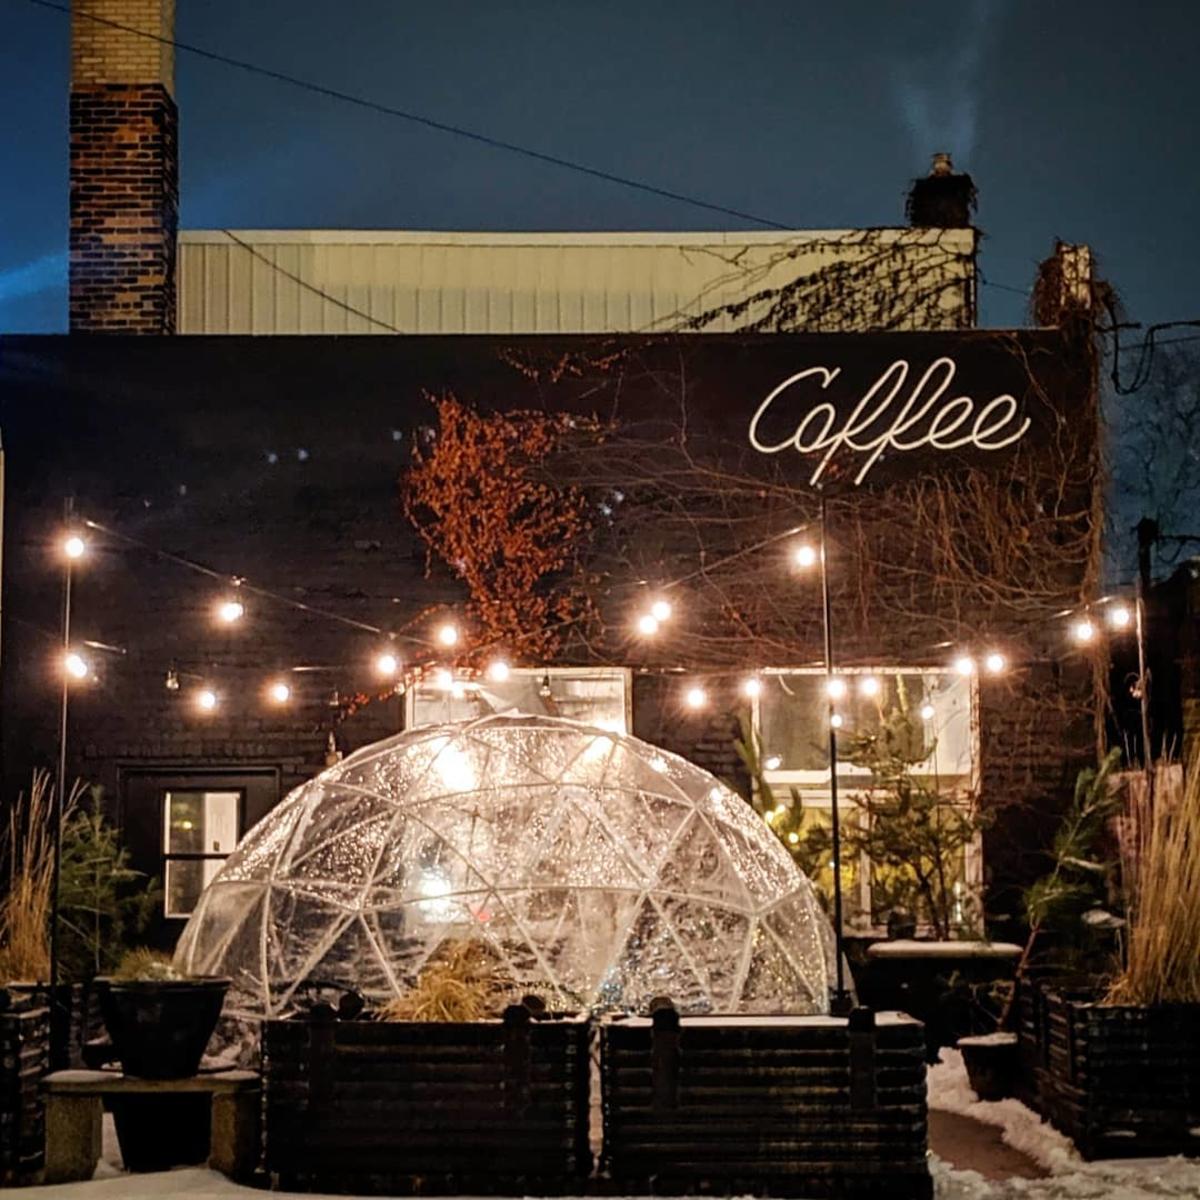 Outdoor igloo at night under the bistro lights in winter at Harless + Hugh Coffee in Bay City